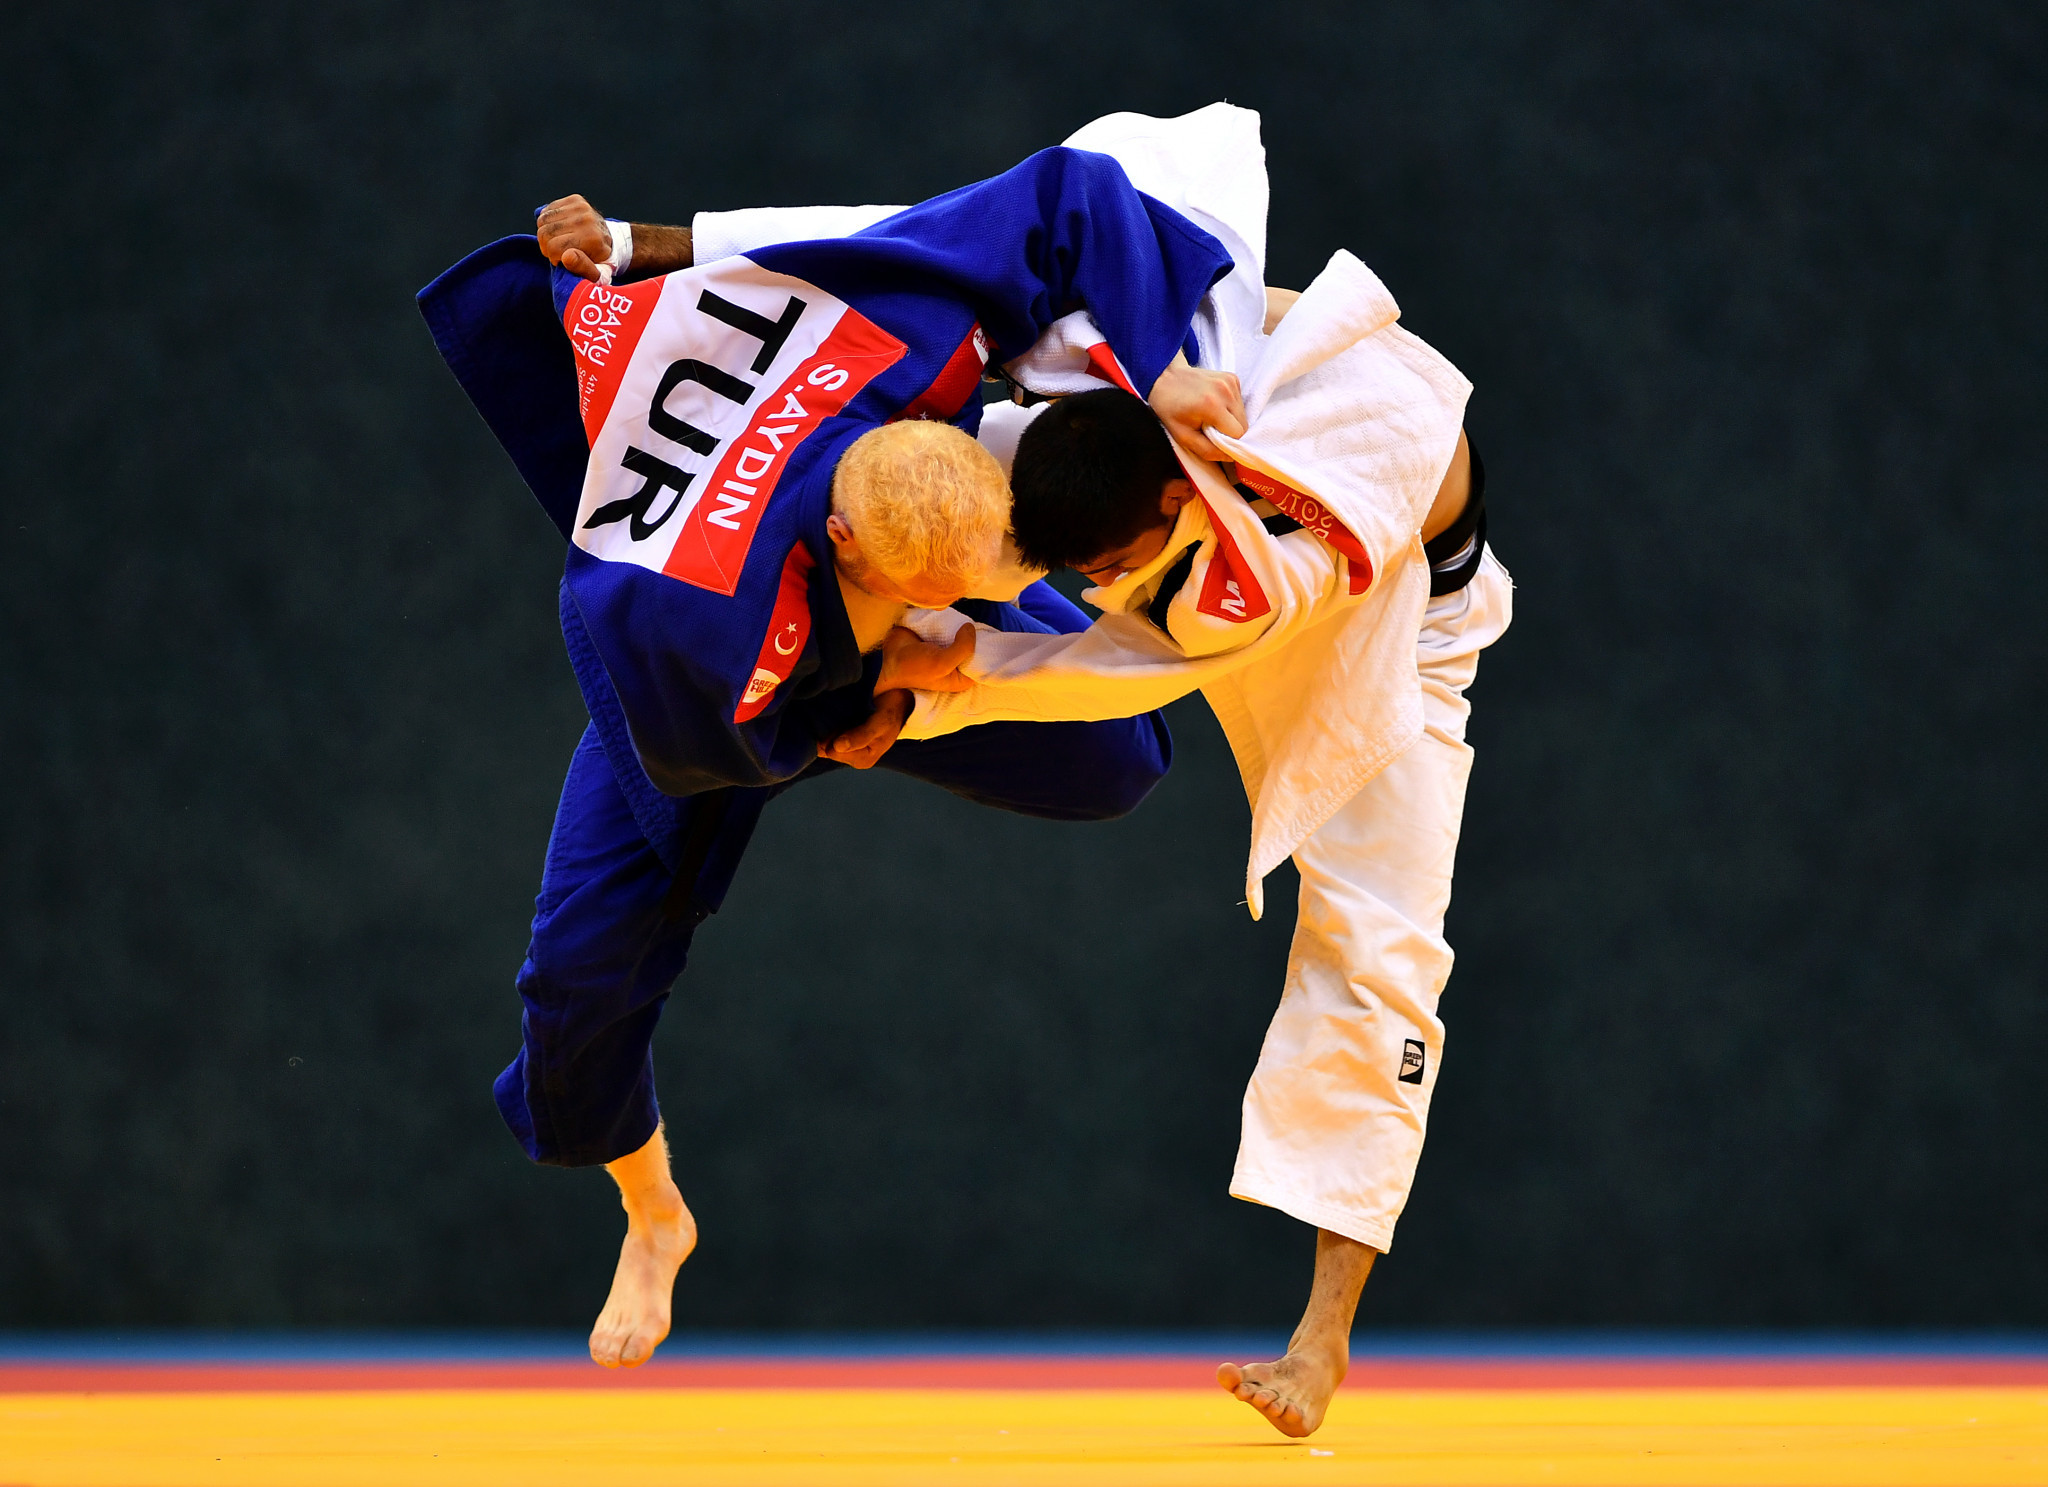 Turkey leads the way after first day of IBSA Judo World Championships